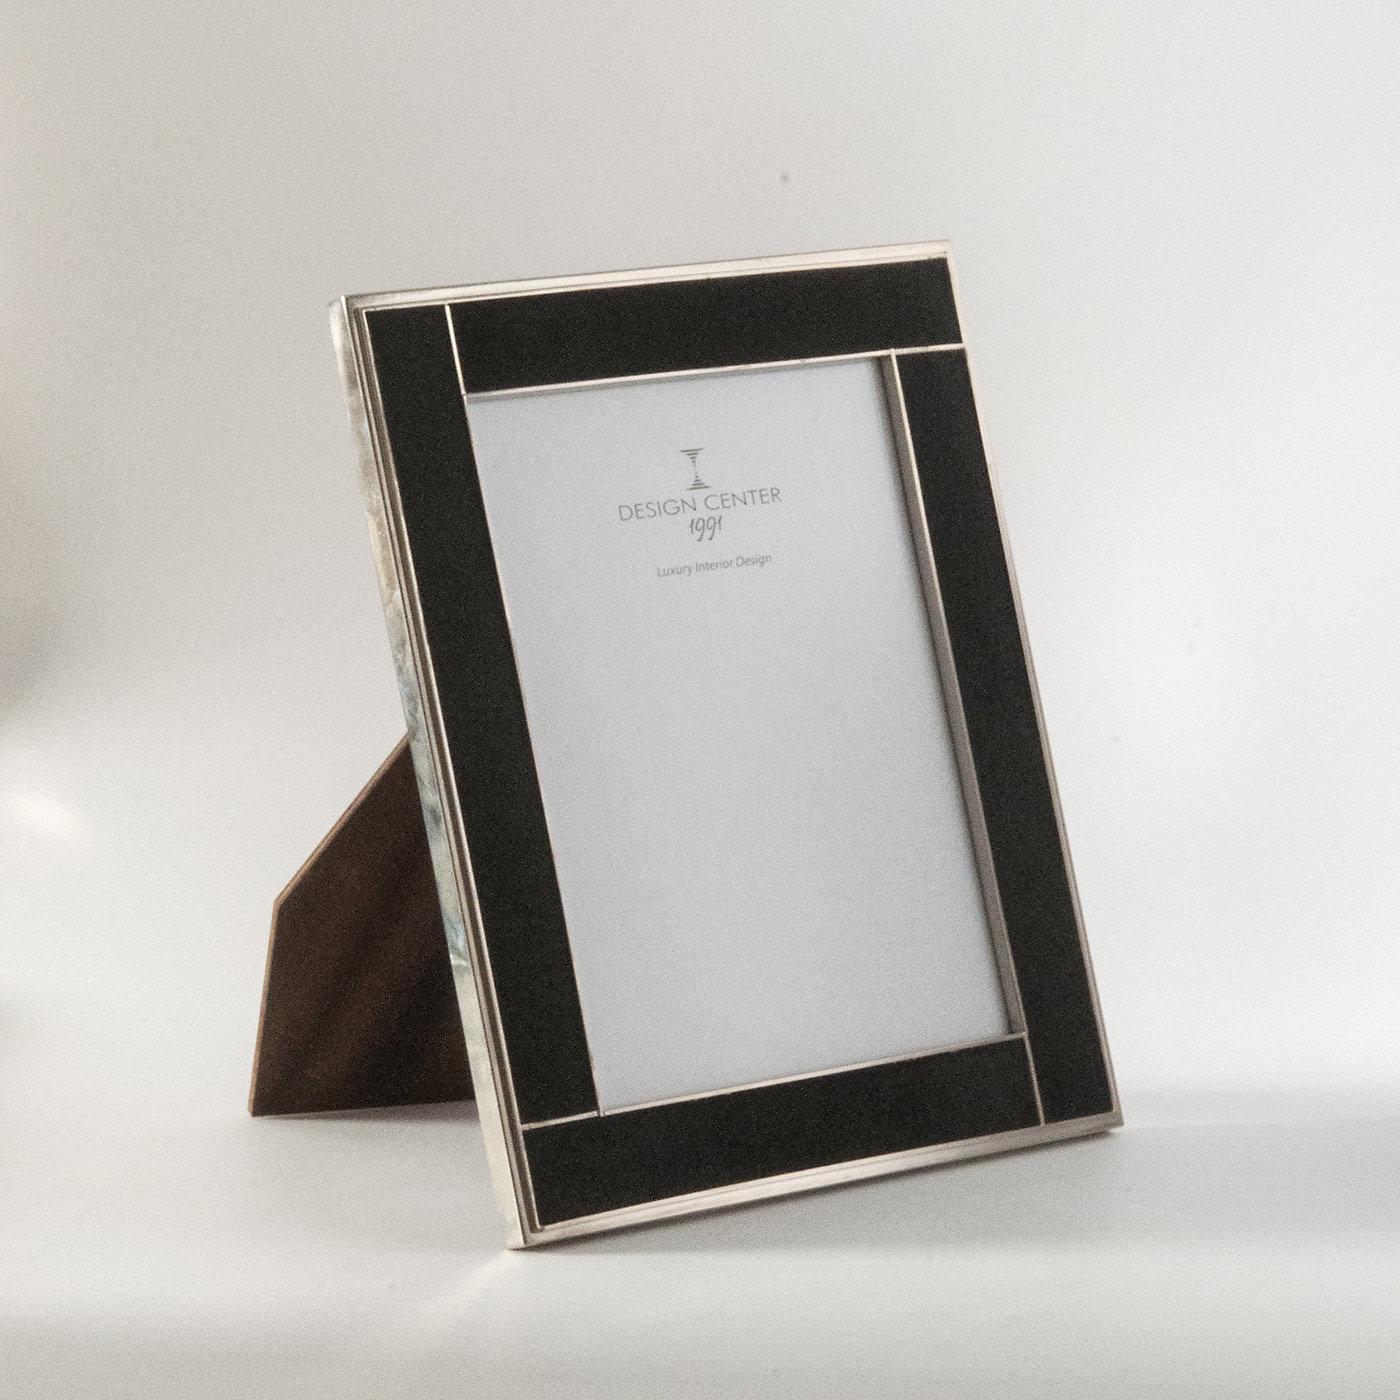 Showcase your most treasured memories atop a desk or console in this elegant picture frame from the Galucharme Black Collection. A piece of exquisite craftsmanship and precious aesthetic that will complement any home décor, the wood frame is covered